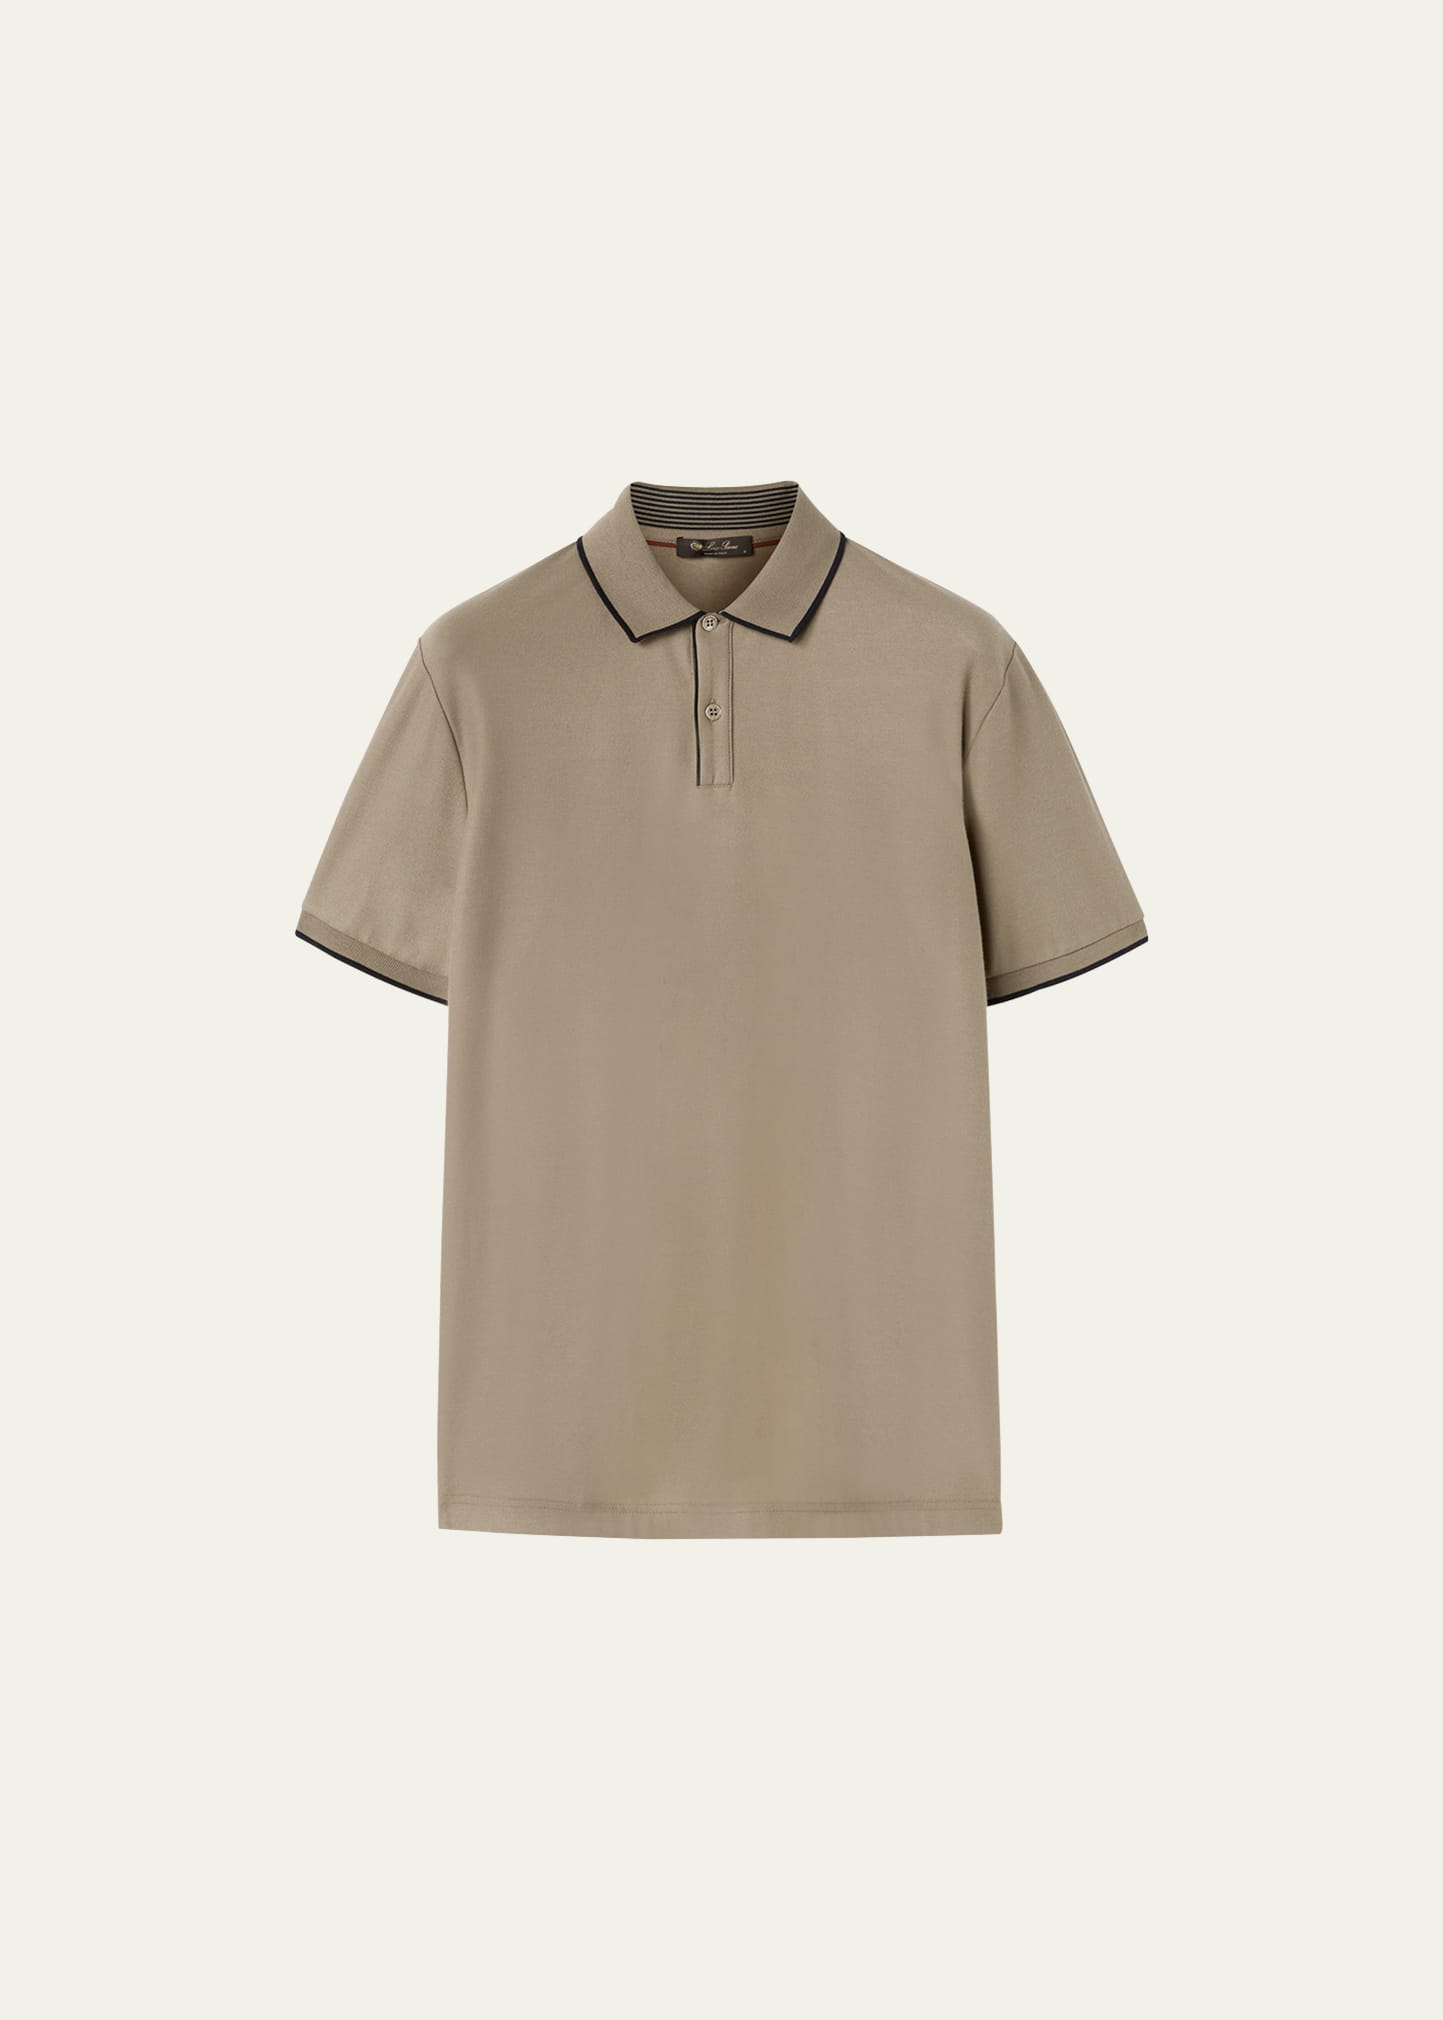 Loro Piana Men's Brentwood Tipped Jersey Pique Polo Shirt In Almond Cookies